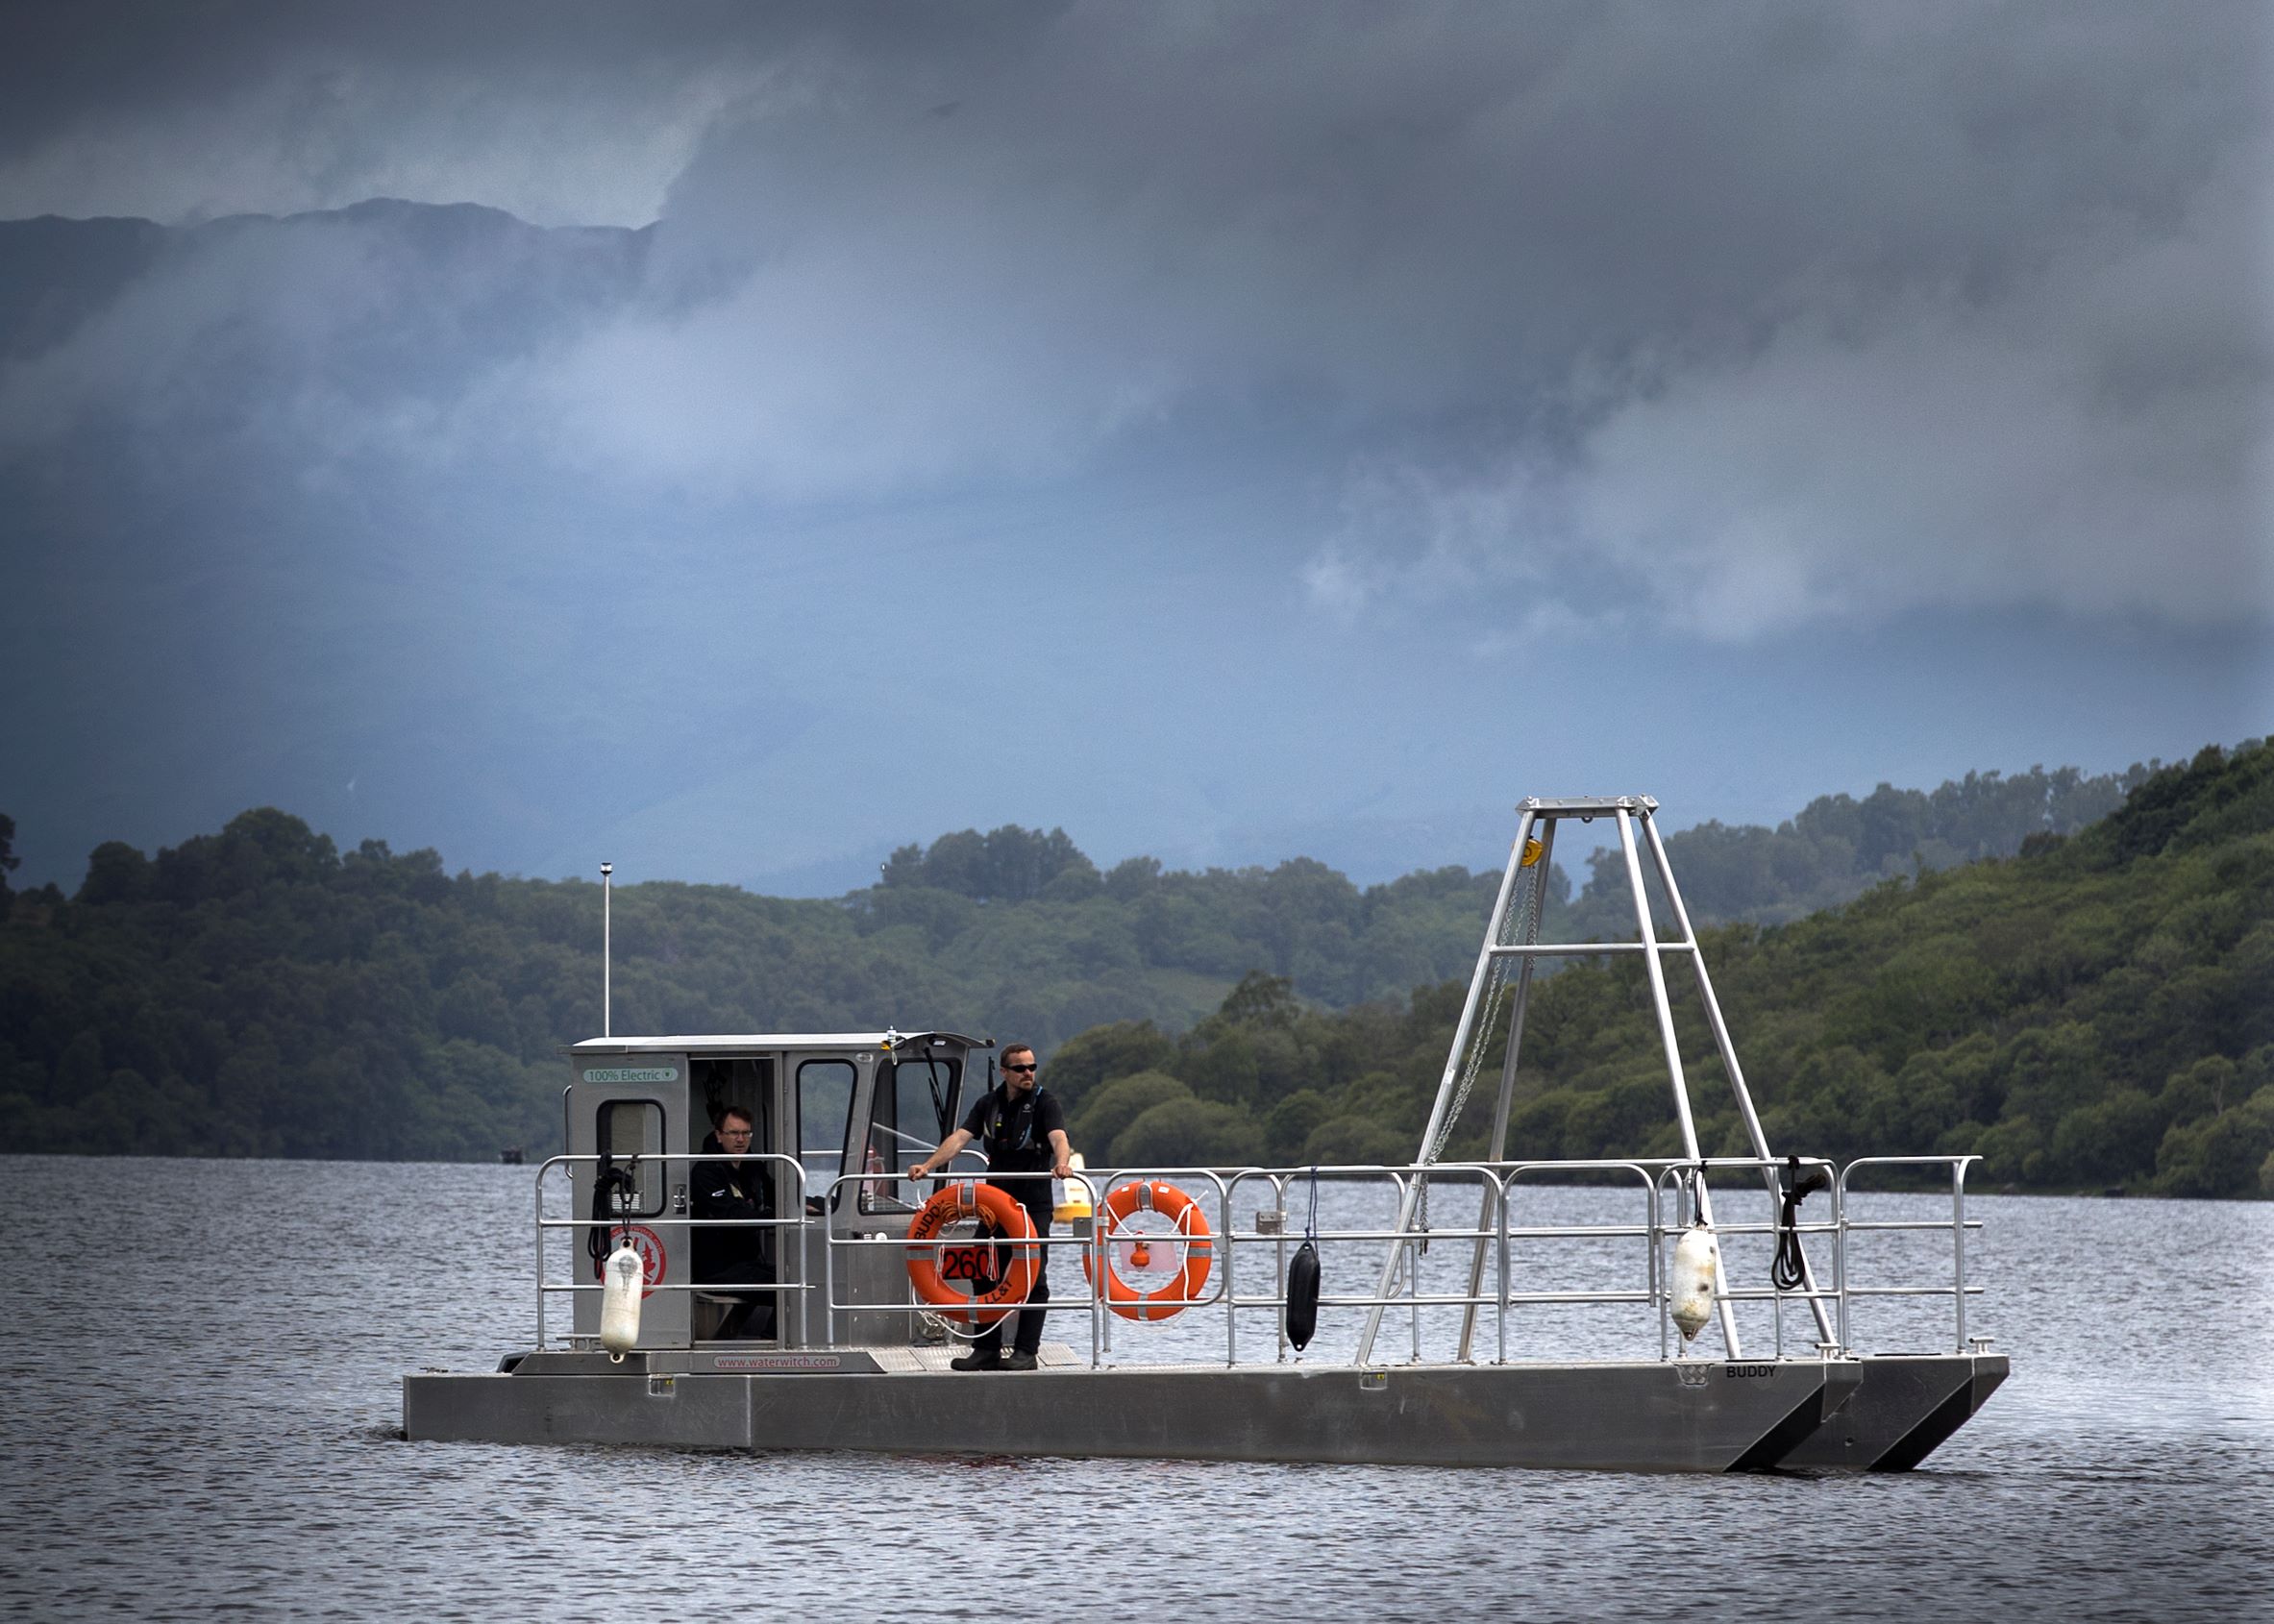 Loch Lomond: Fully electric boat set sail on the water